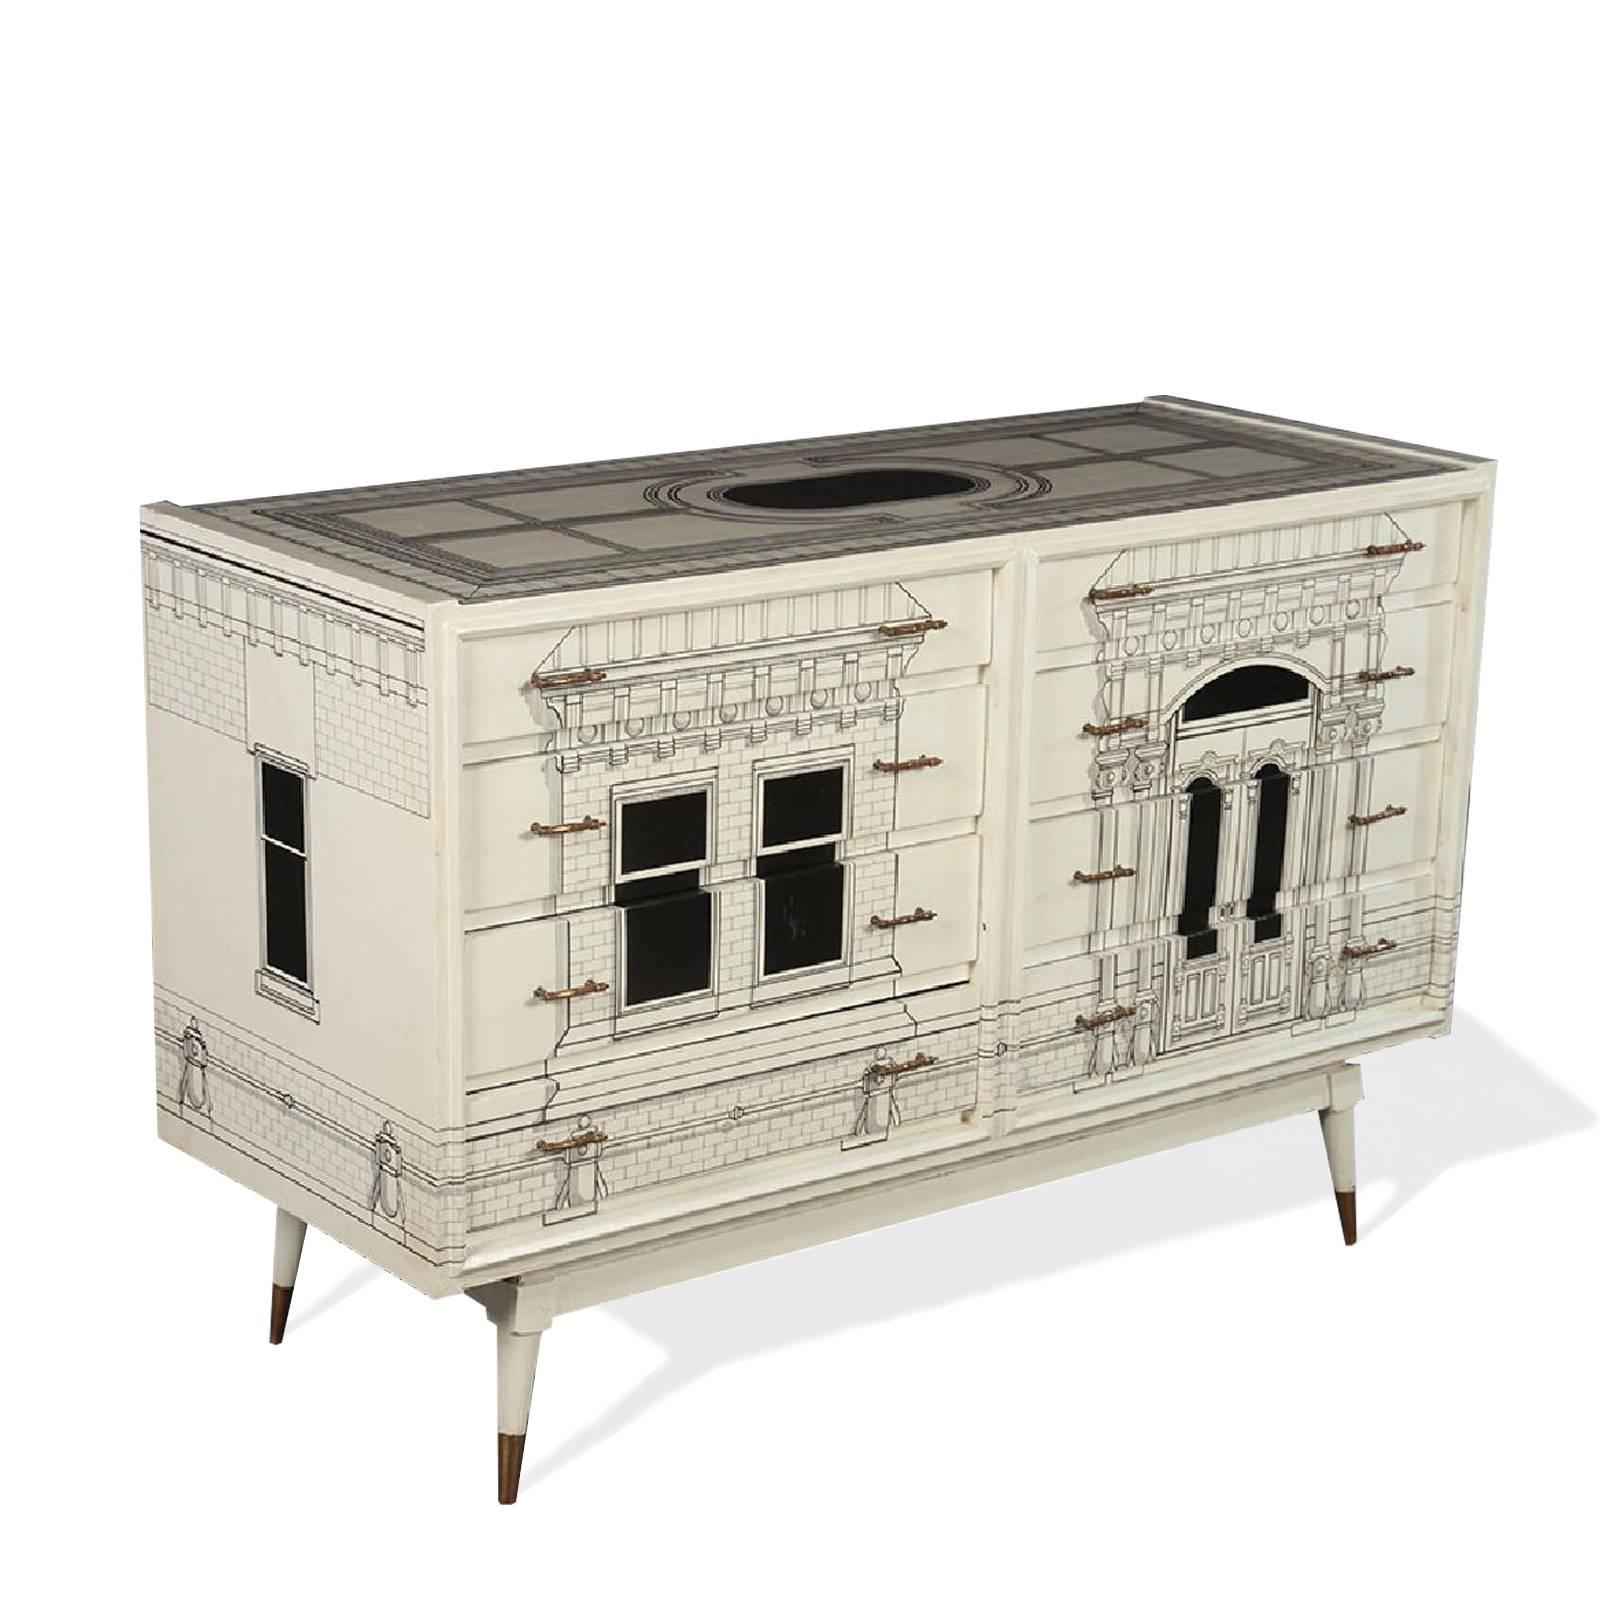 Fornasetti style commode having eight drawers with neoclassical inspired architectural building façade decorated front, top and sides. Raised on tapering legs.